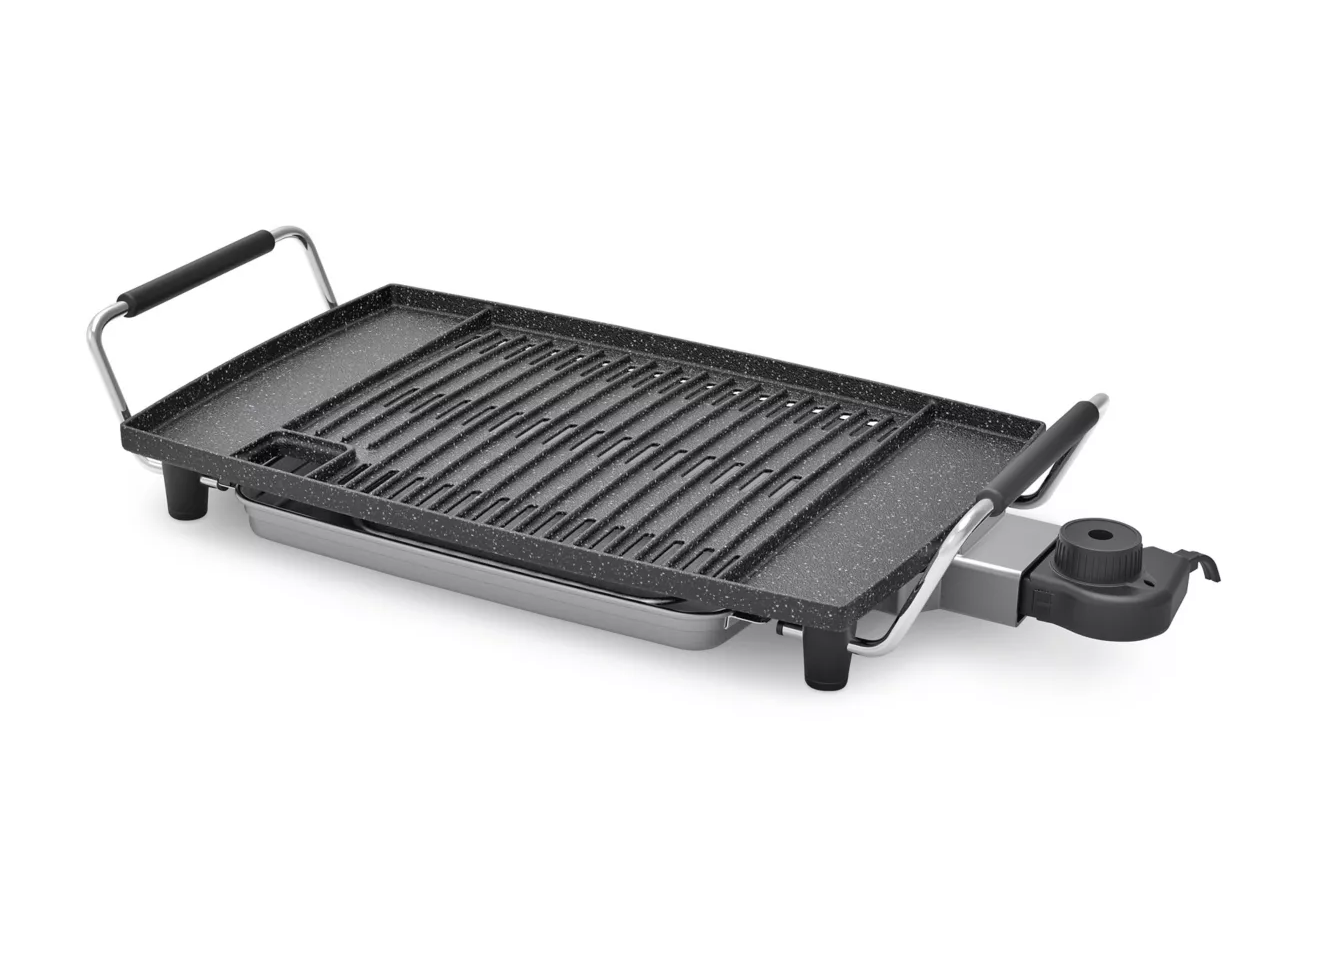 How do you clean an indoor smokeless grill?